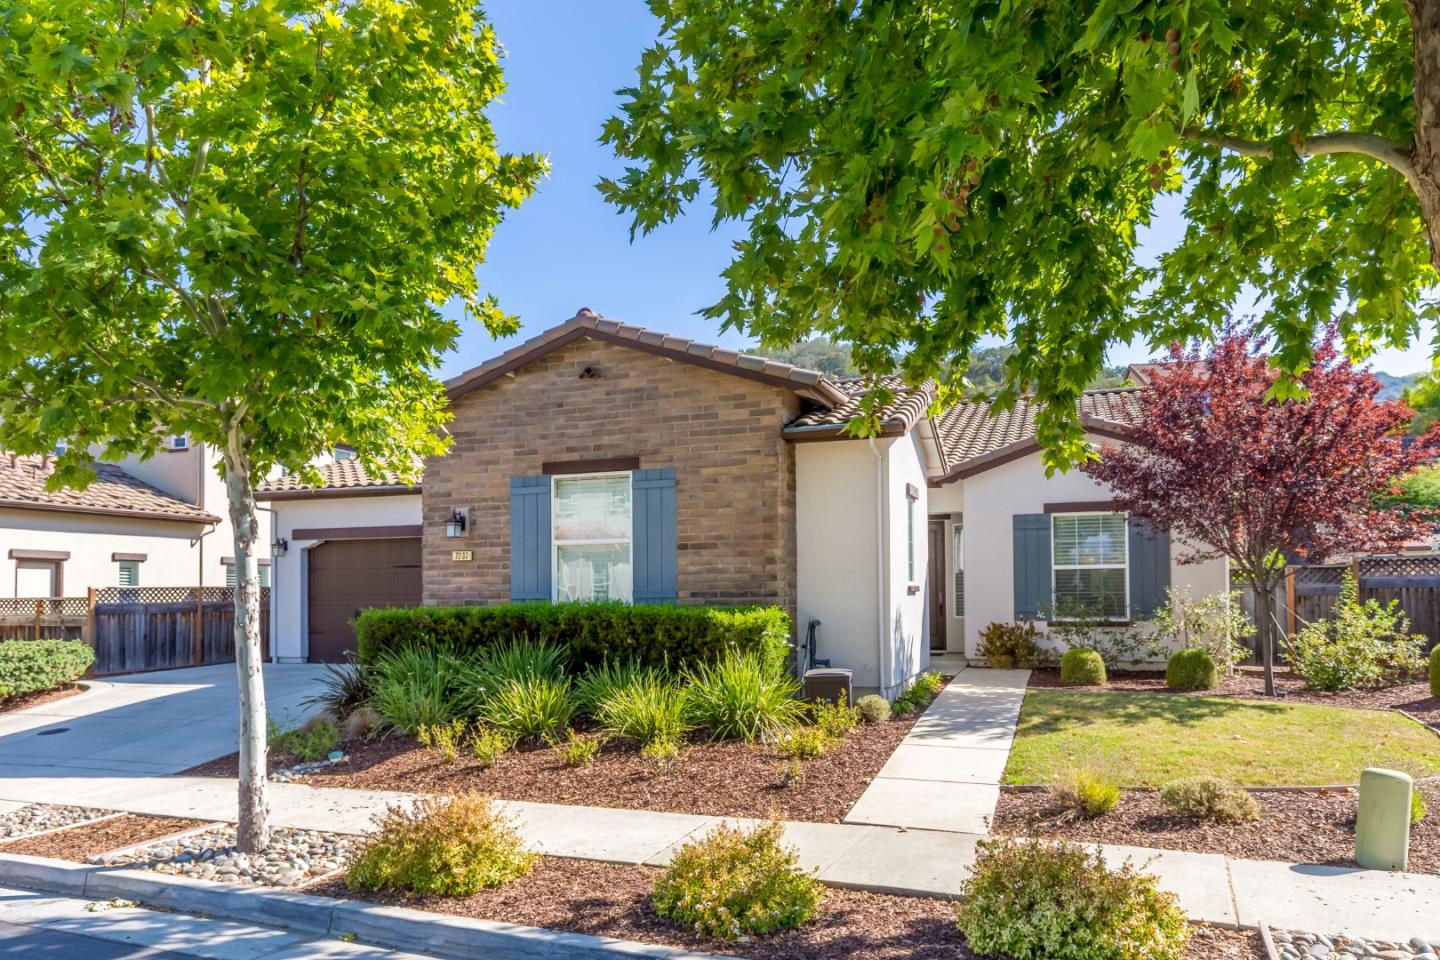 7237 Pitlochry DR, GILROY, CA 95020